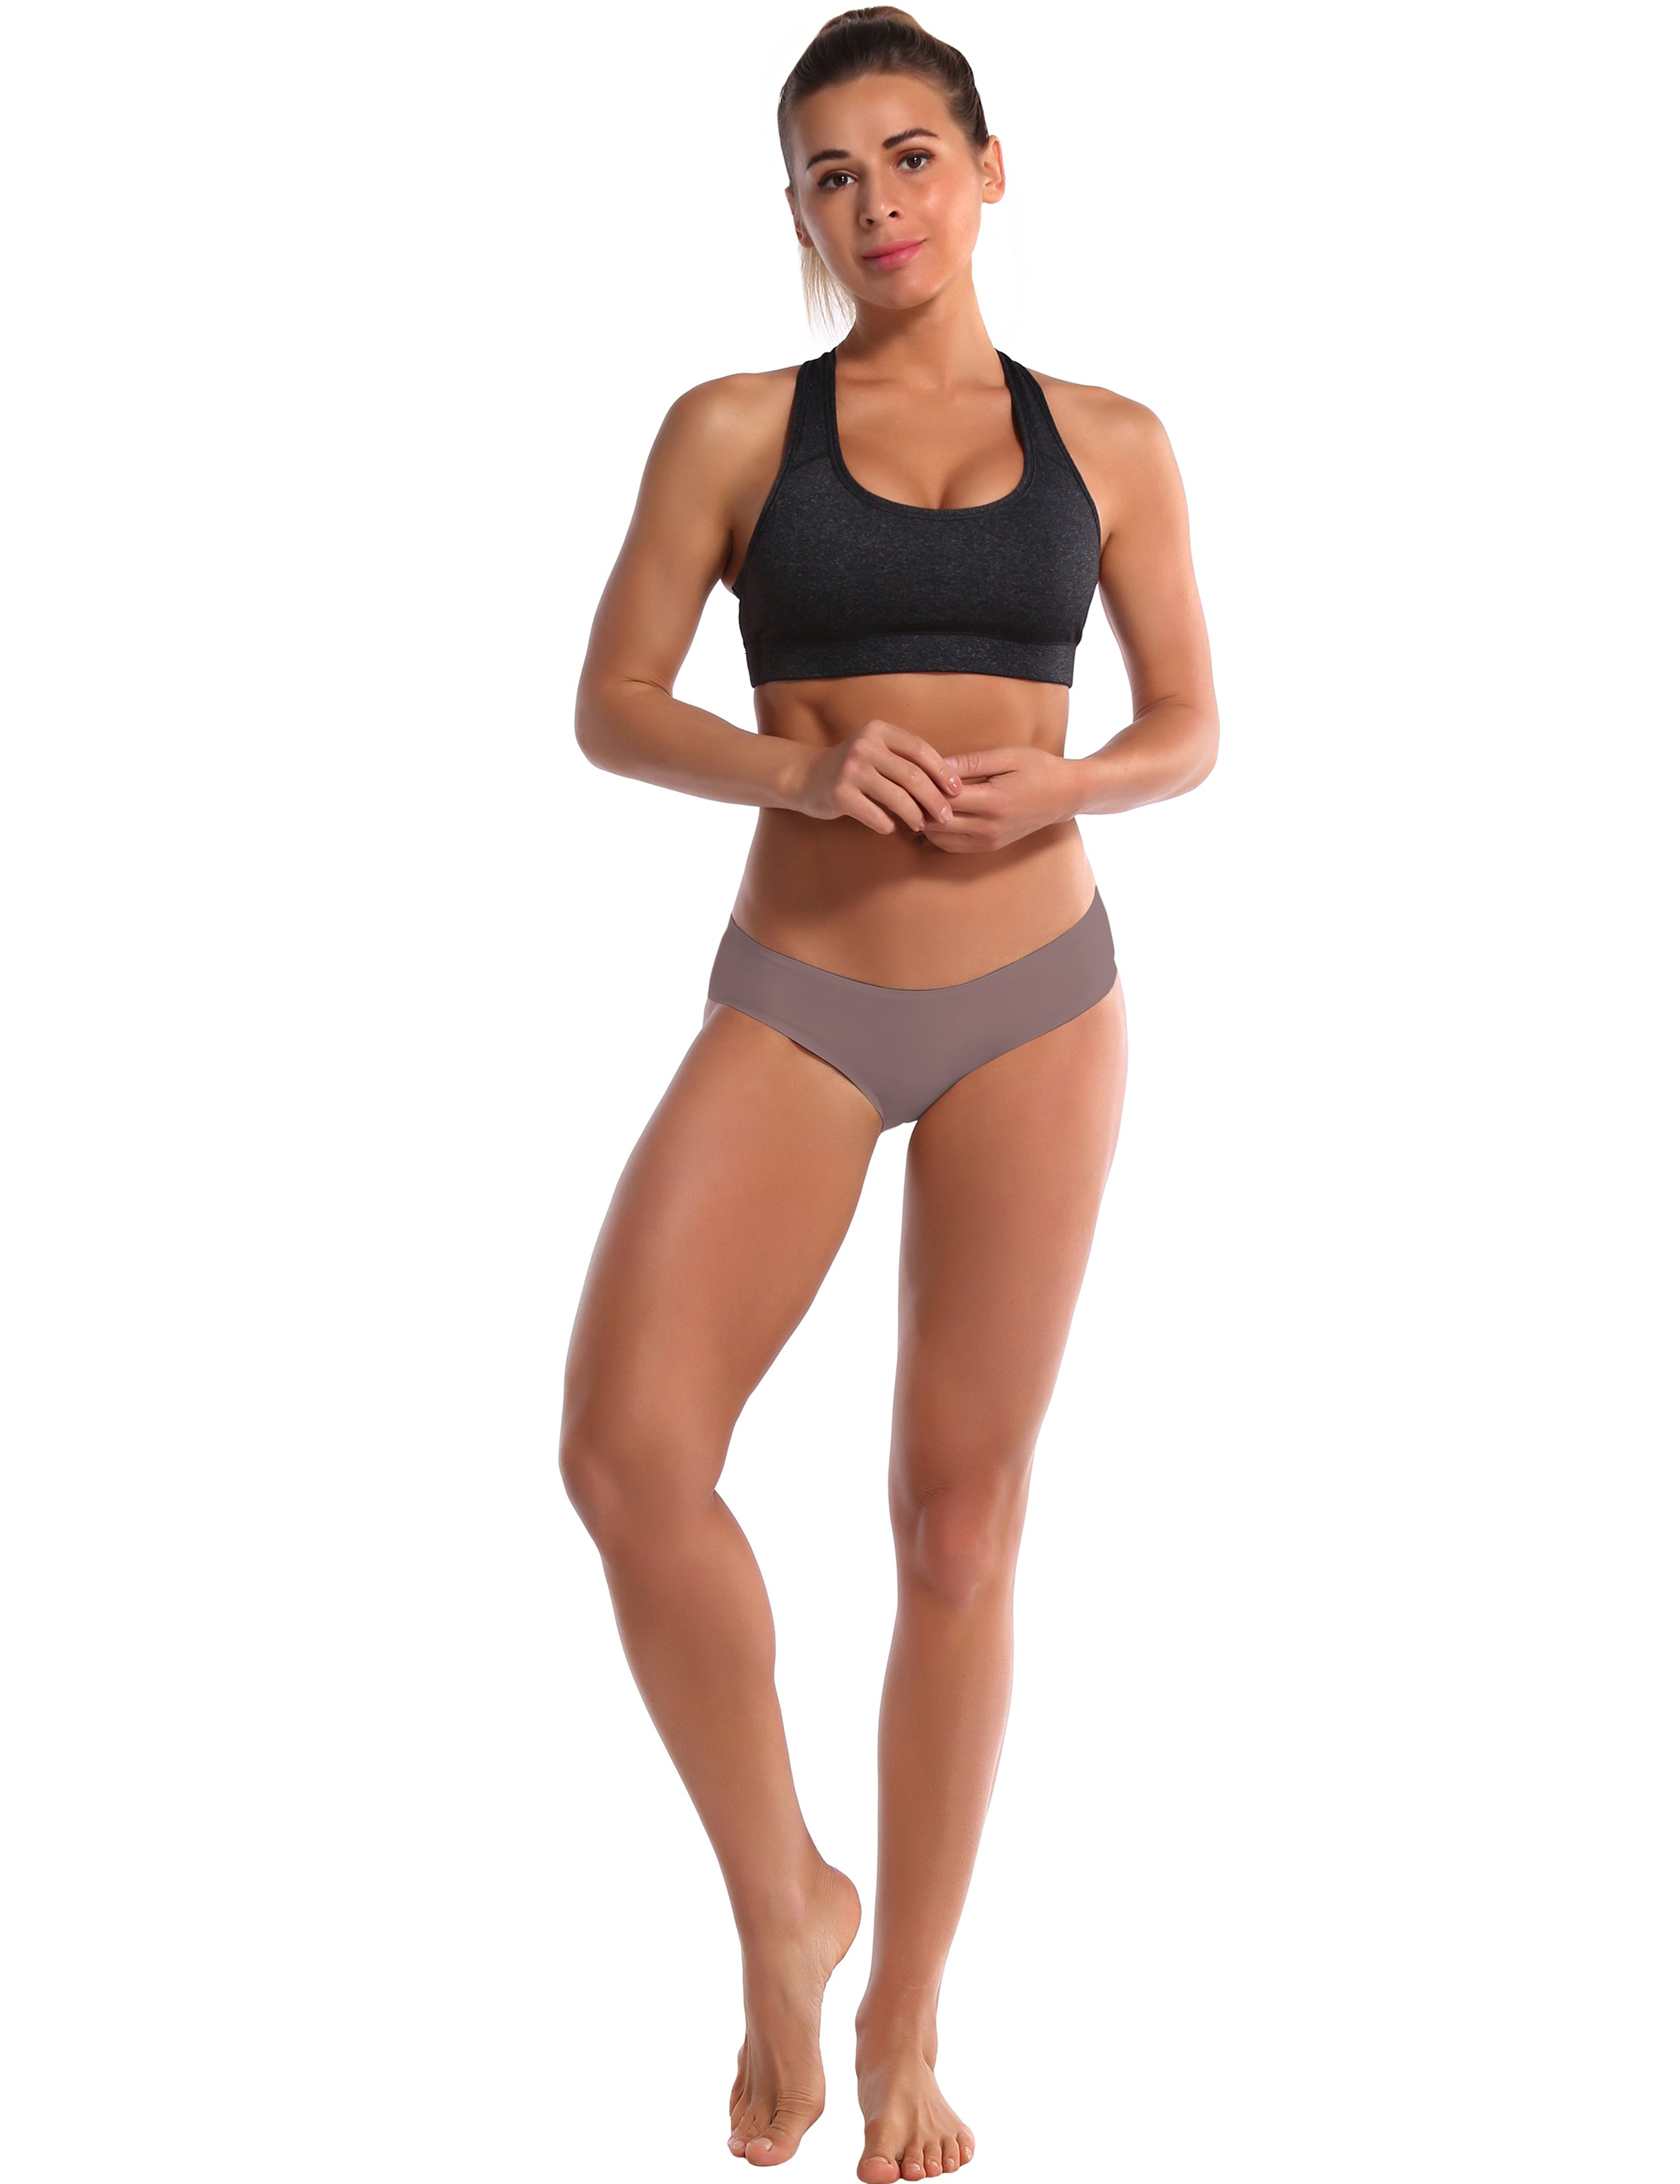 Invisibles Sport Bikini Panties brown Sleek, soft, smooth and totally comfortable: our newest bikini style is here. High elasticity High density Softest-ever fabric Laser cutting Unsealed Comfortable No panty lines Machine wash 95% Nylon, 5% Spandex